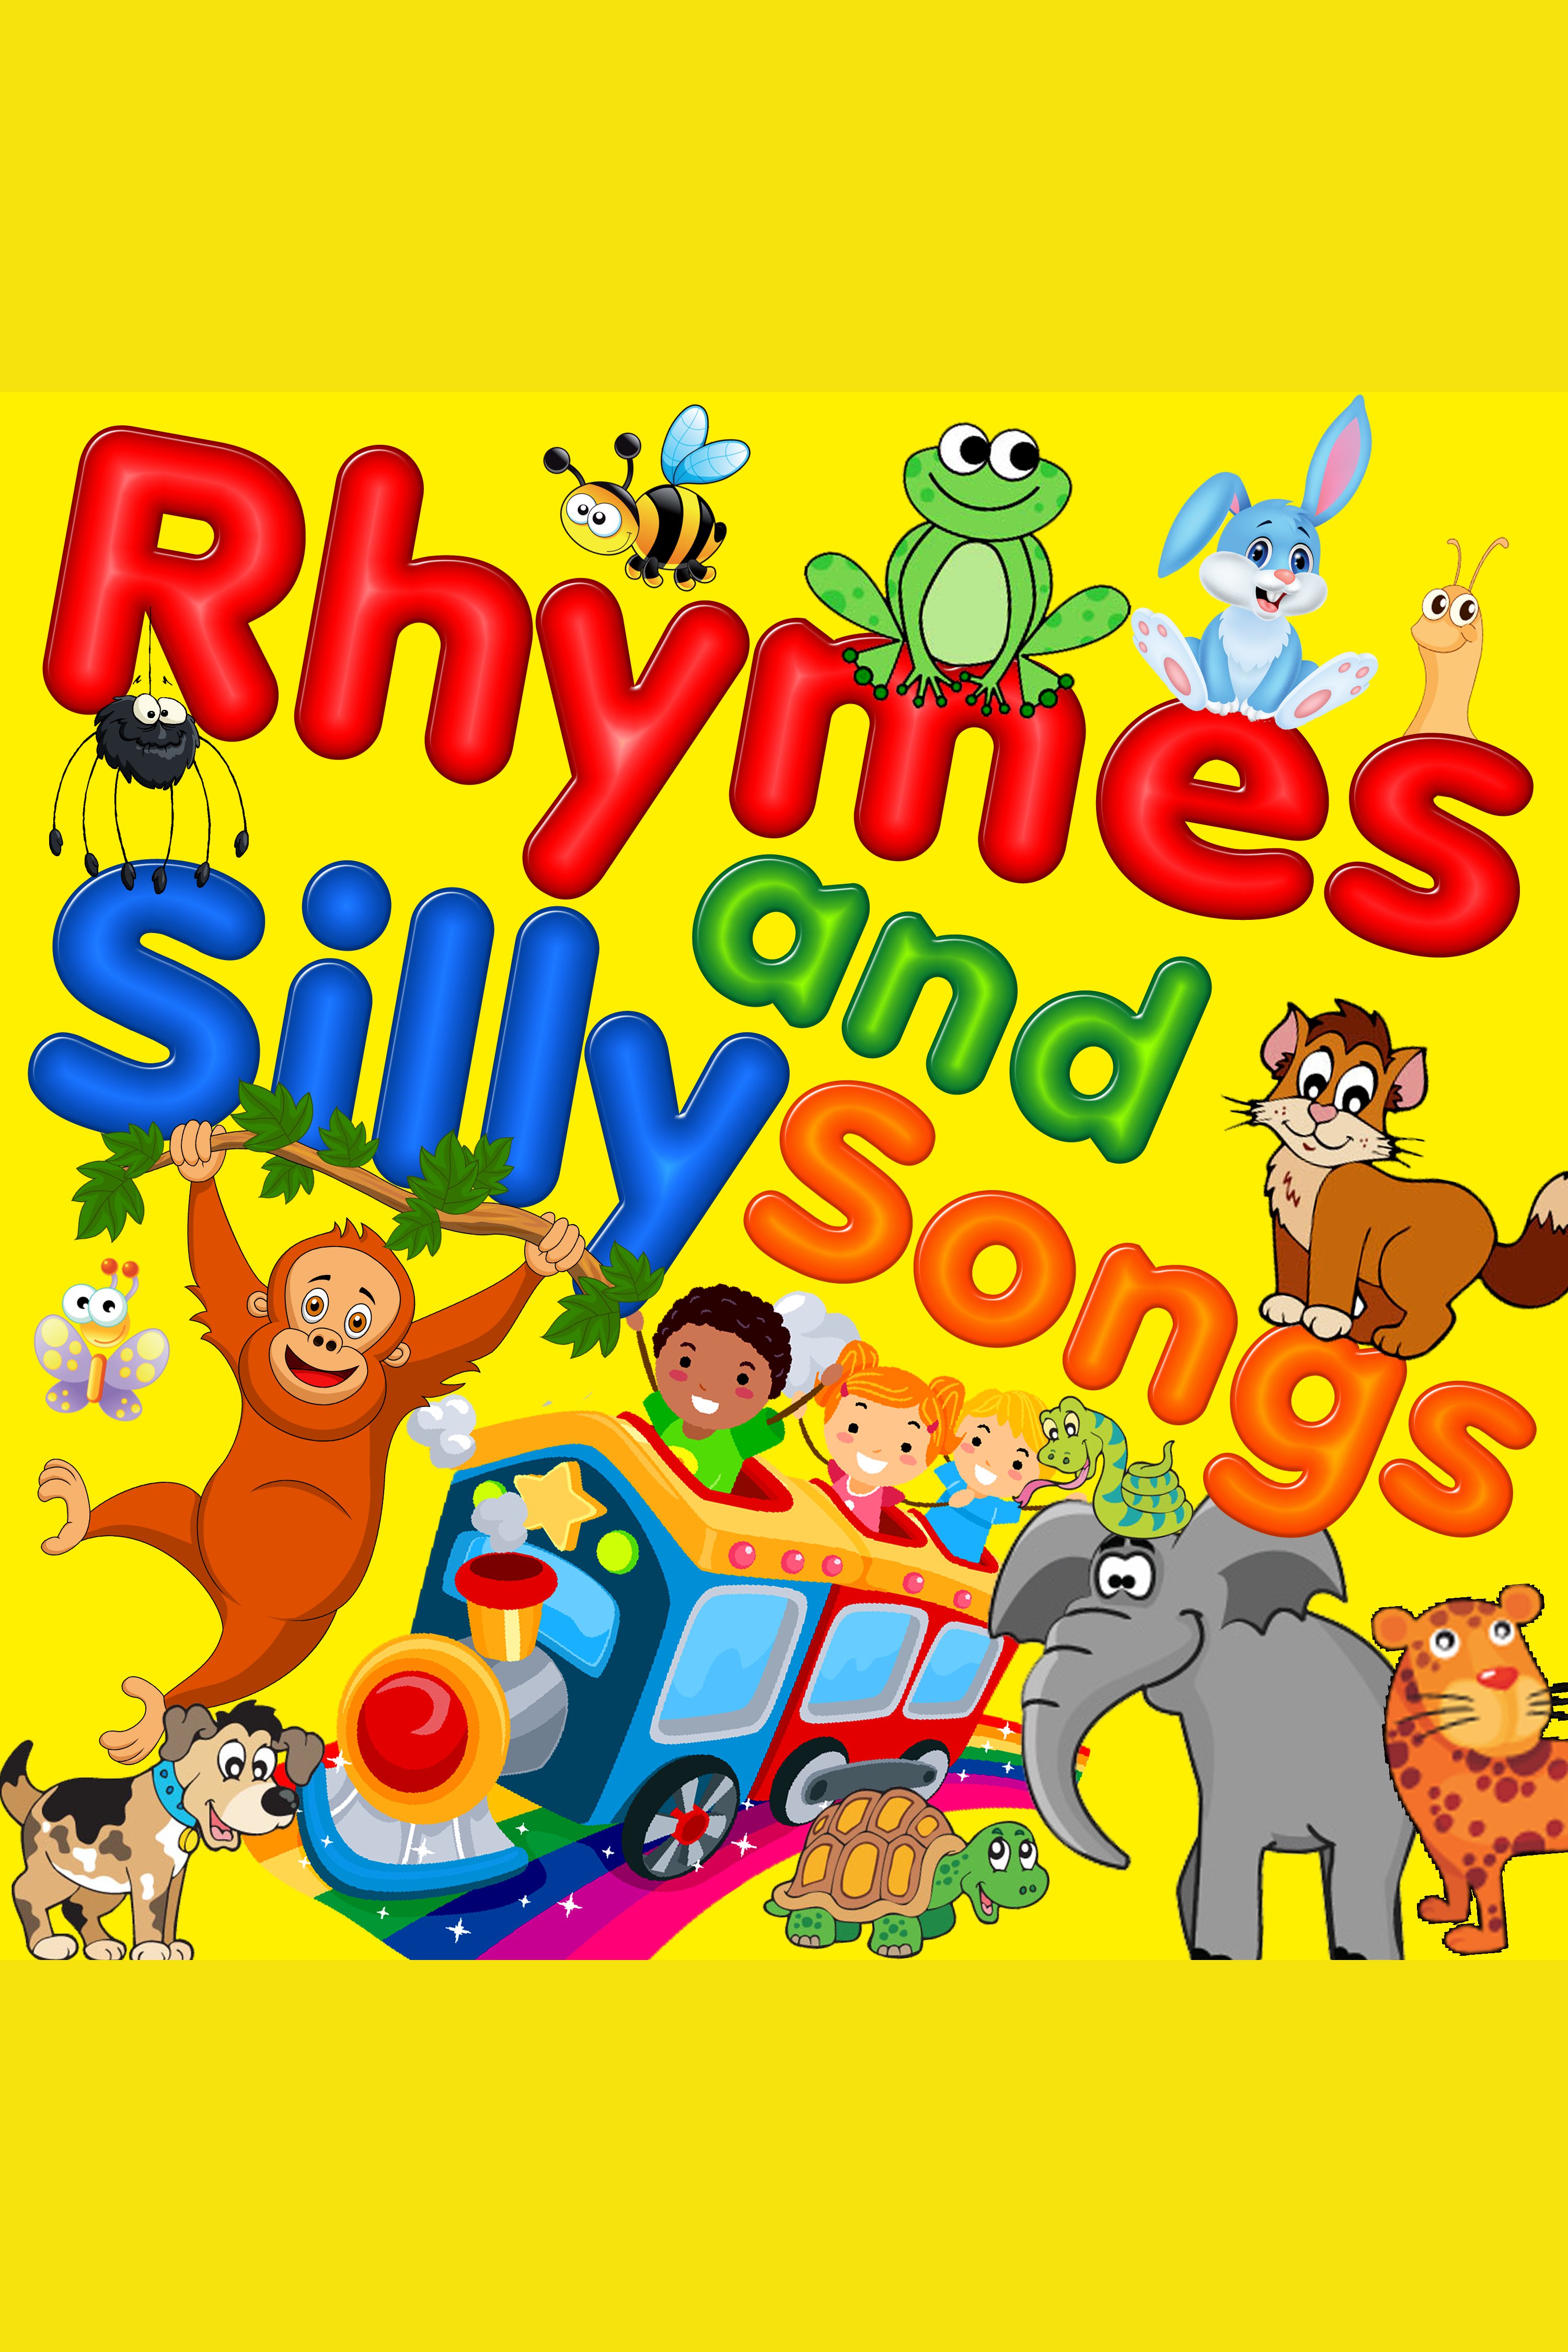 Rhymes & Silly Songs cover image